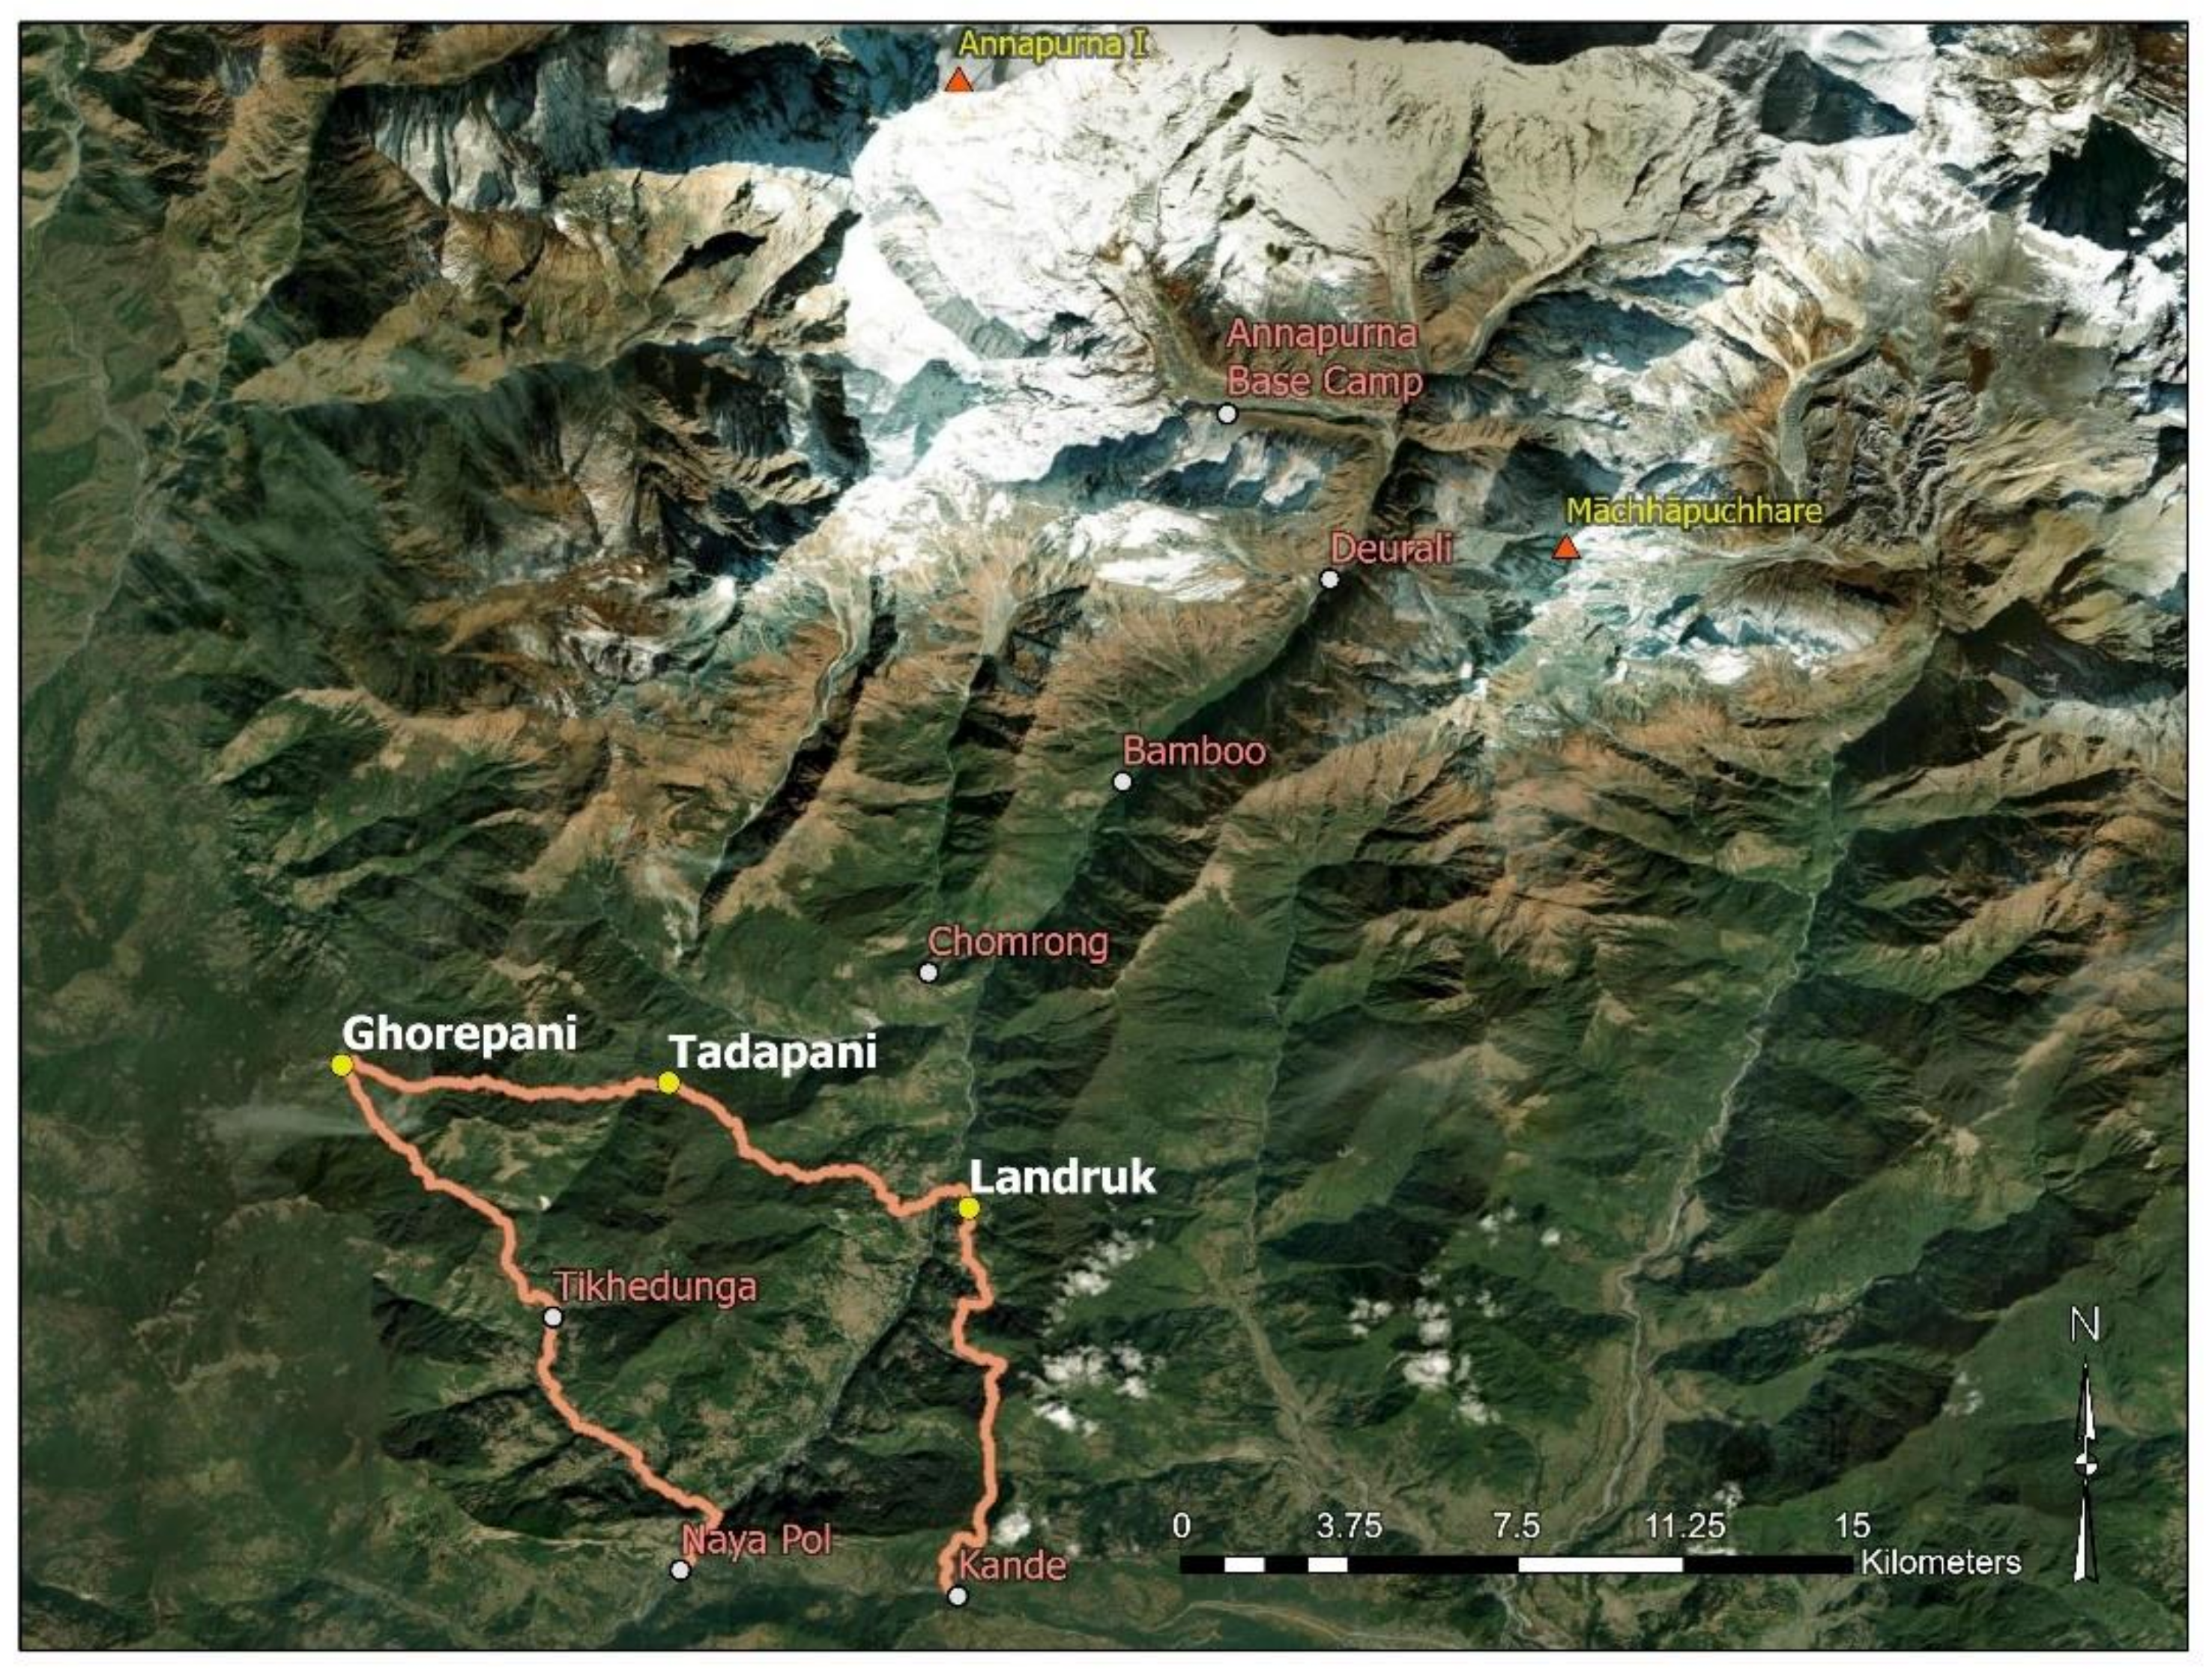 Atmosphere | Free Full-Text | PM2.5 Pollution Levels and Chemical  Components at Teahouses along the Poon Hill Trek in Nepal